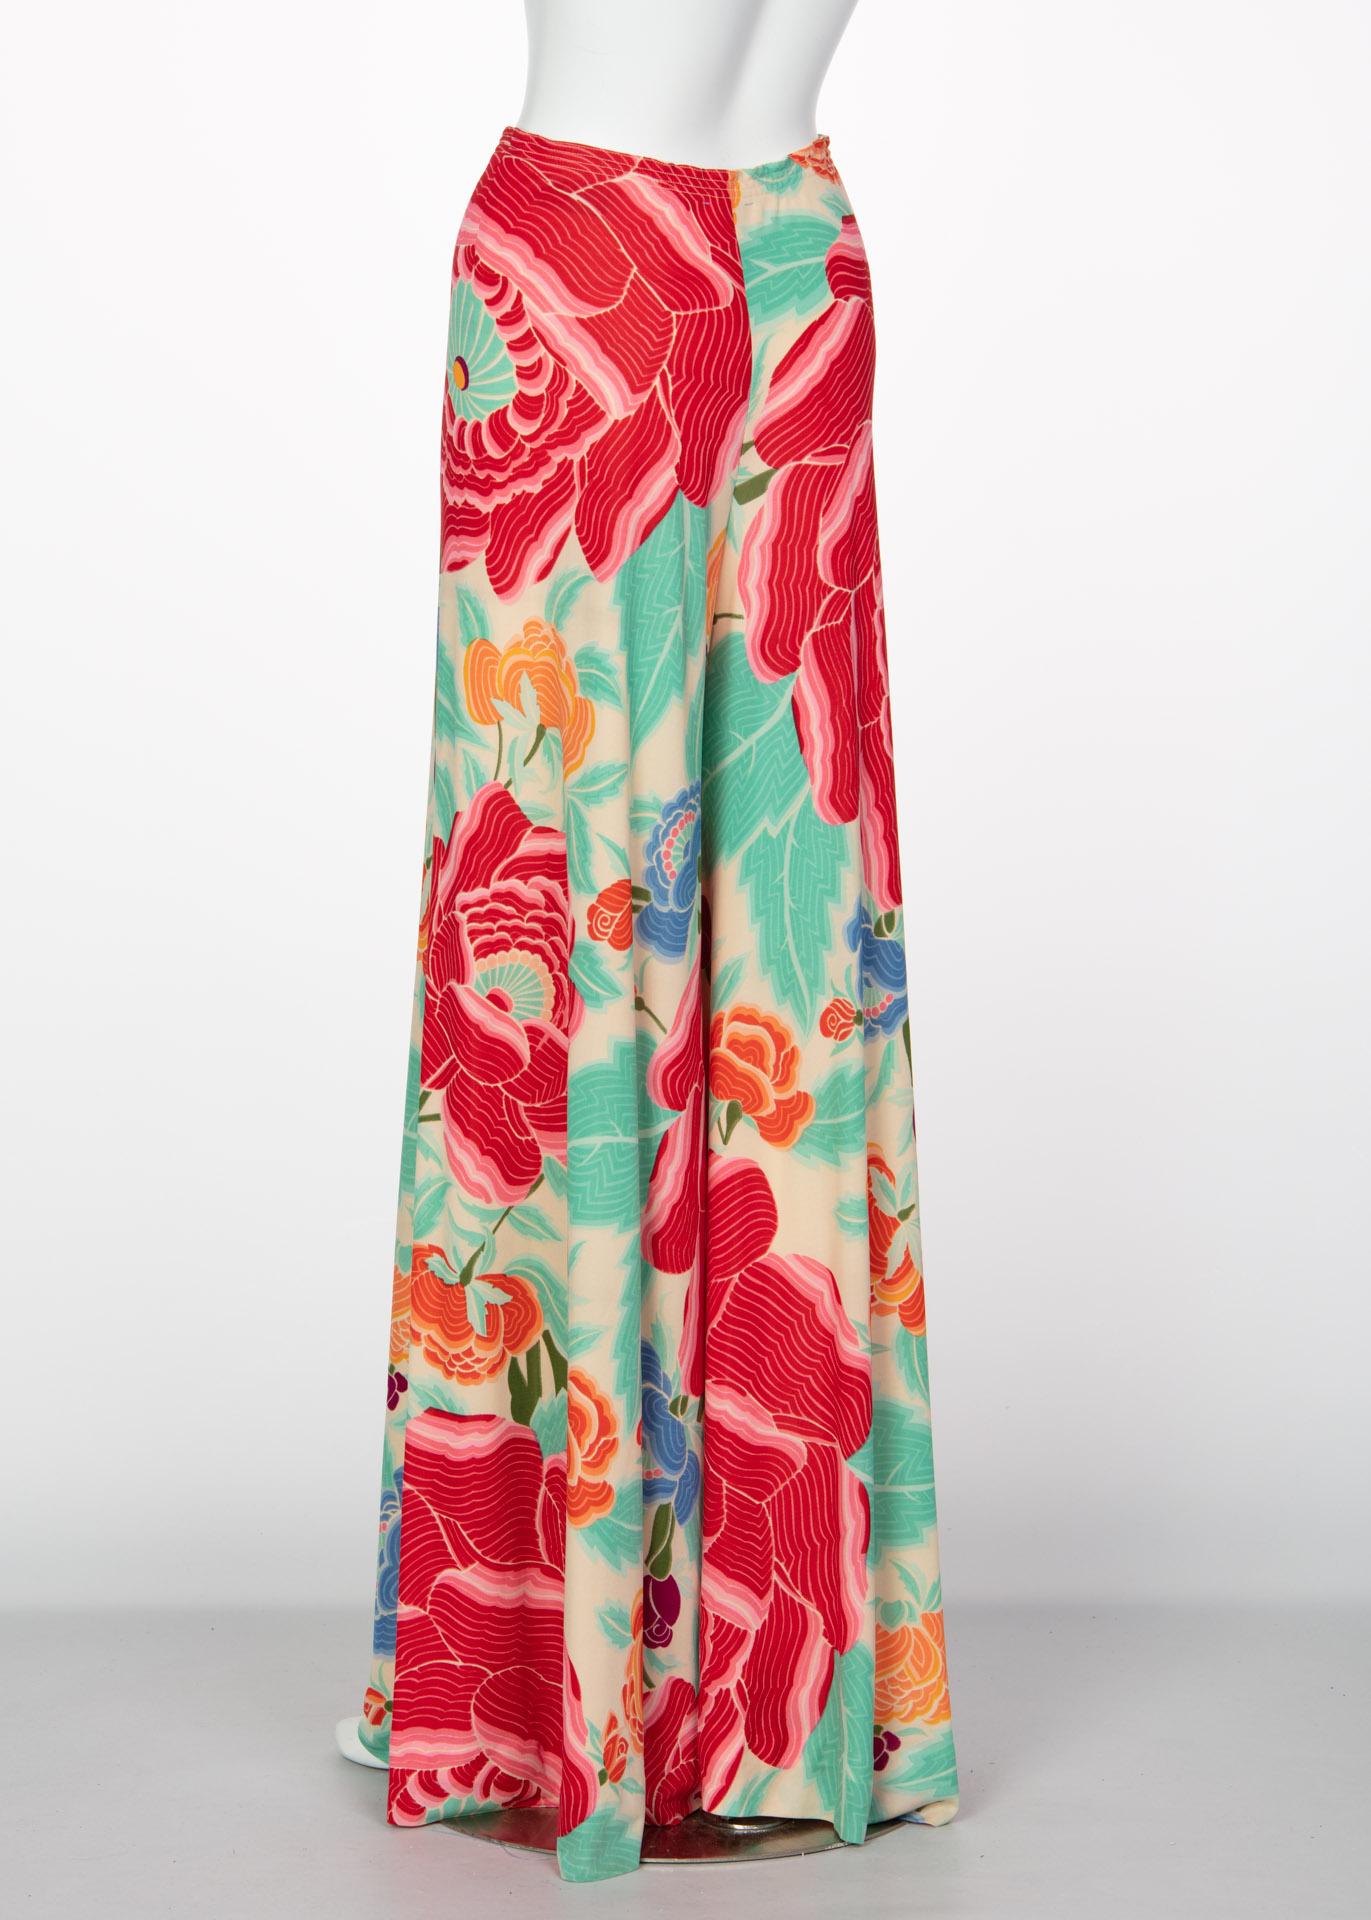 Missoni Multicolored Floral Print Top Palazzo Pant Set, 1970s  For Sale 2